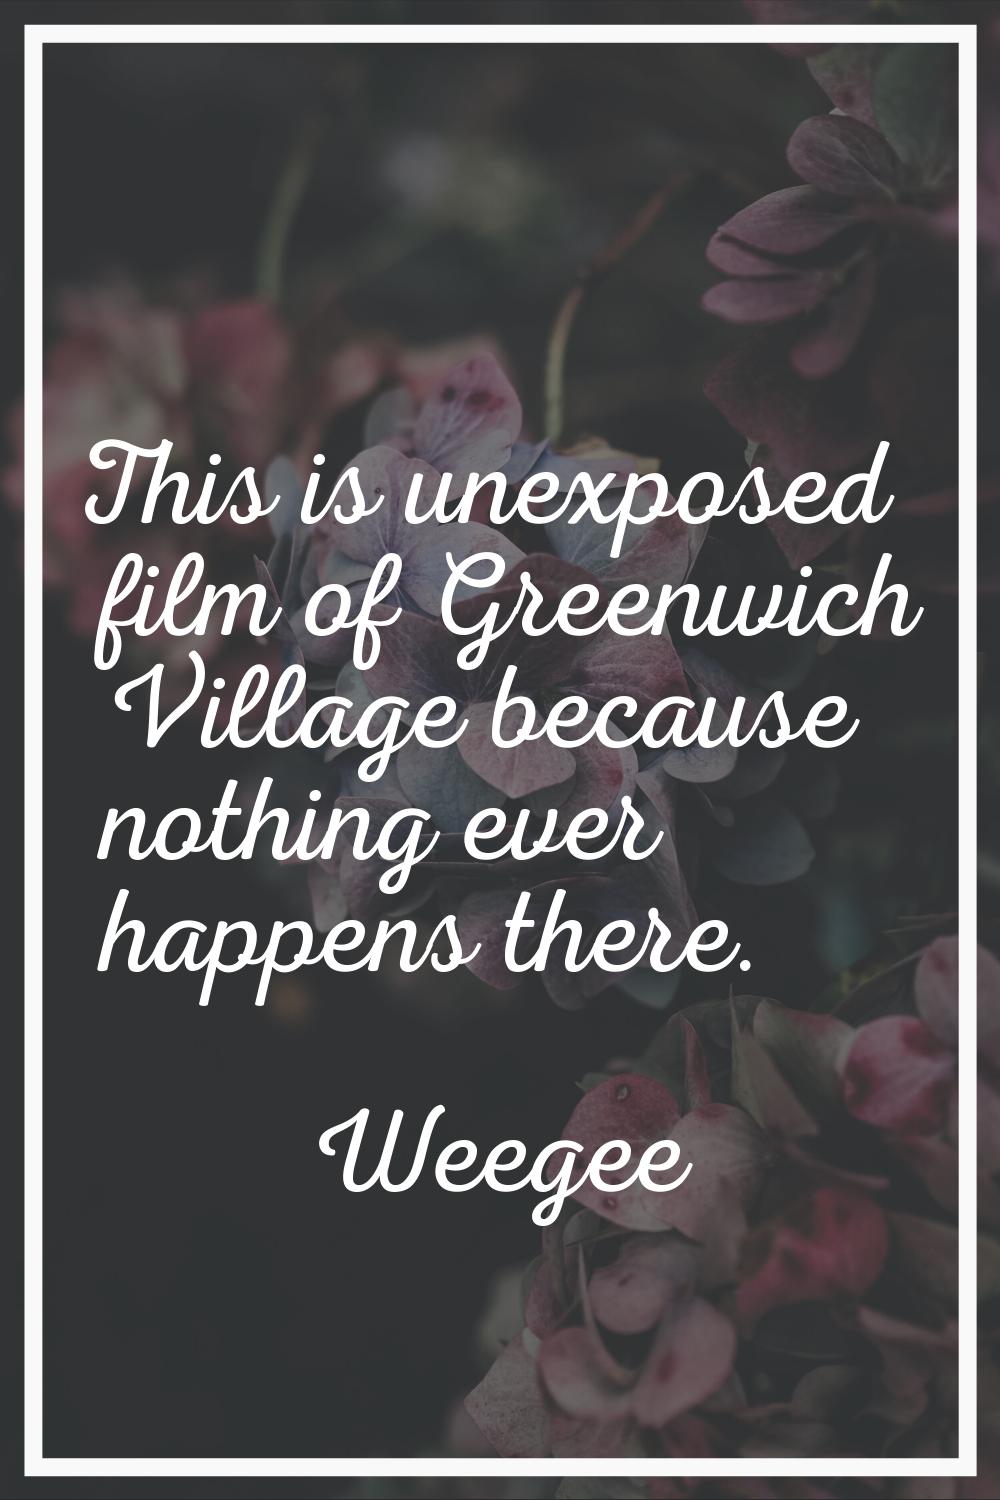 This is unexposed film of Greenwich Village because nothing ever happens there.